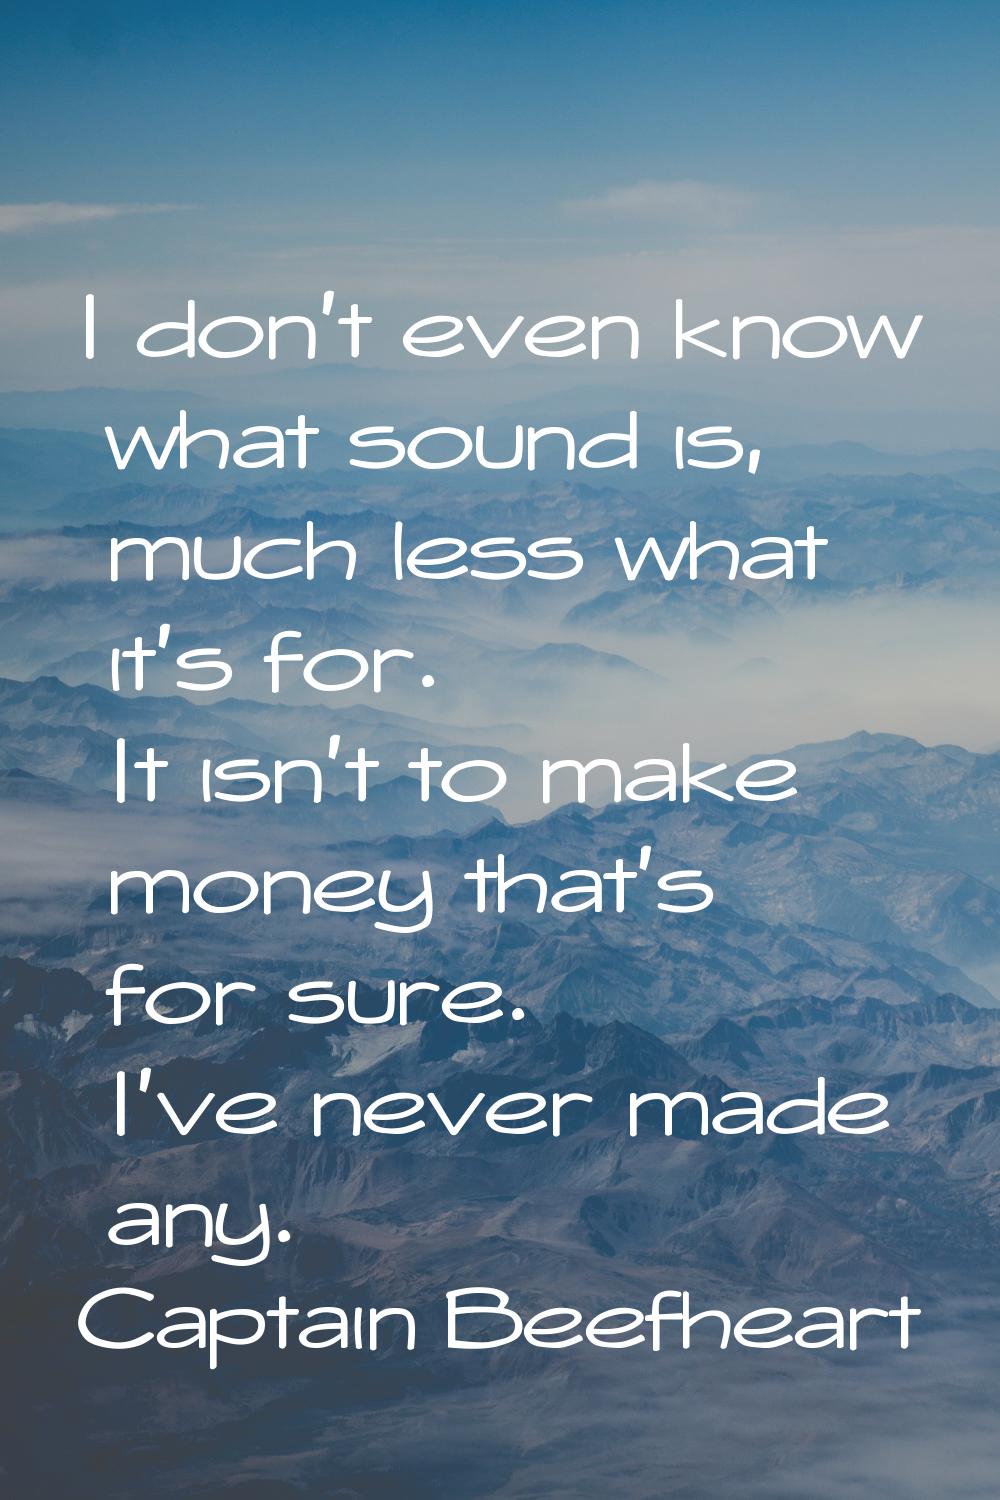 I don't even know what sound is, much less what it's for. It isn't to make money that's for sure. I